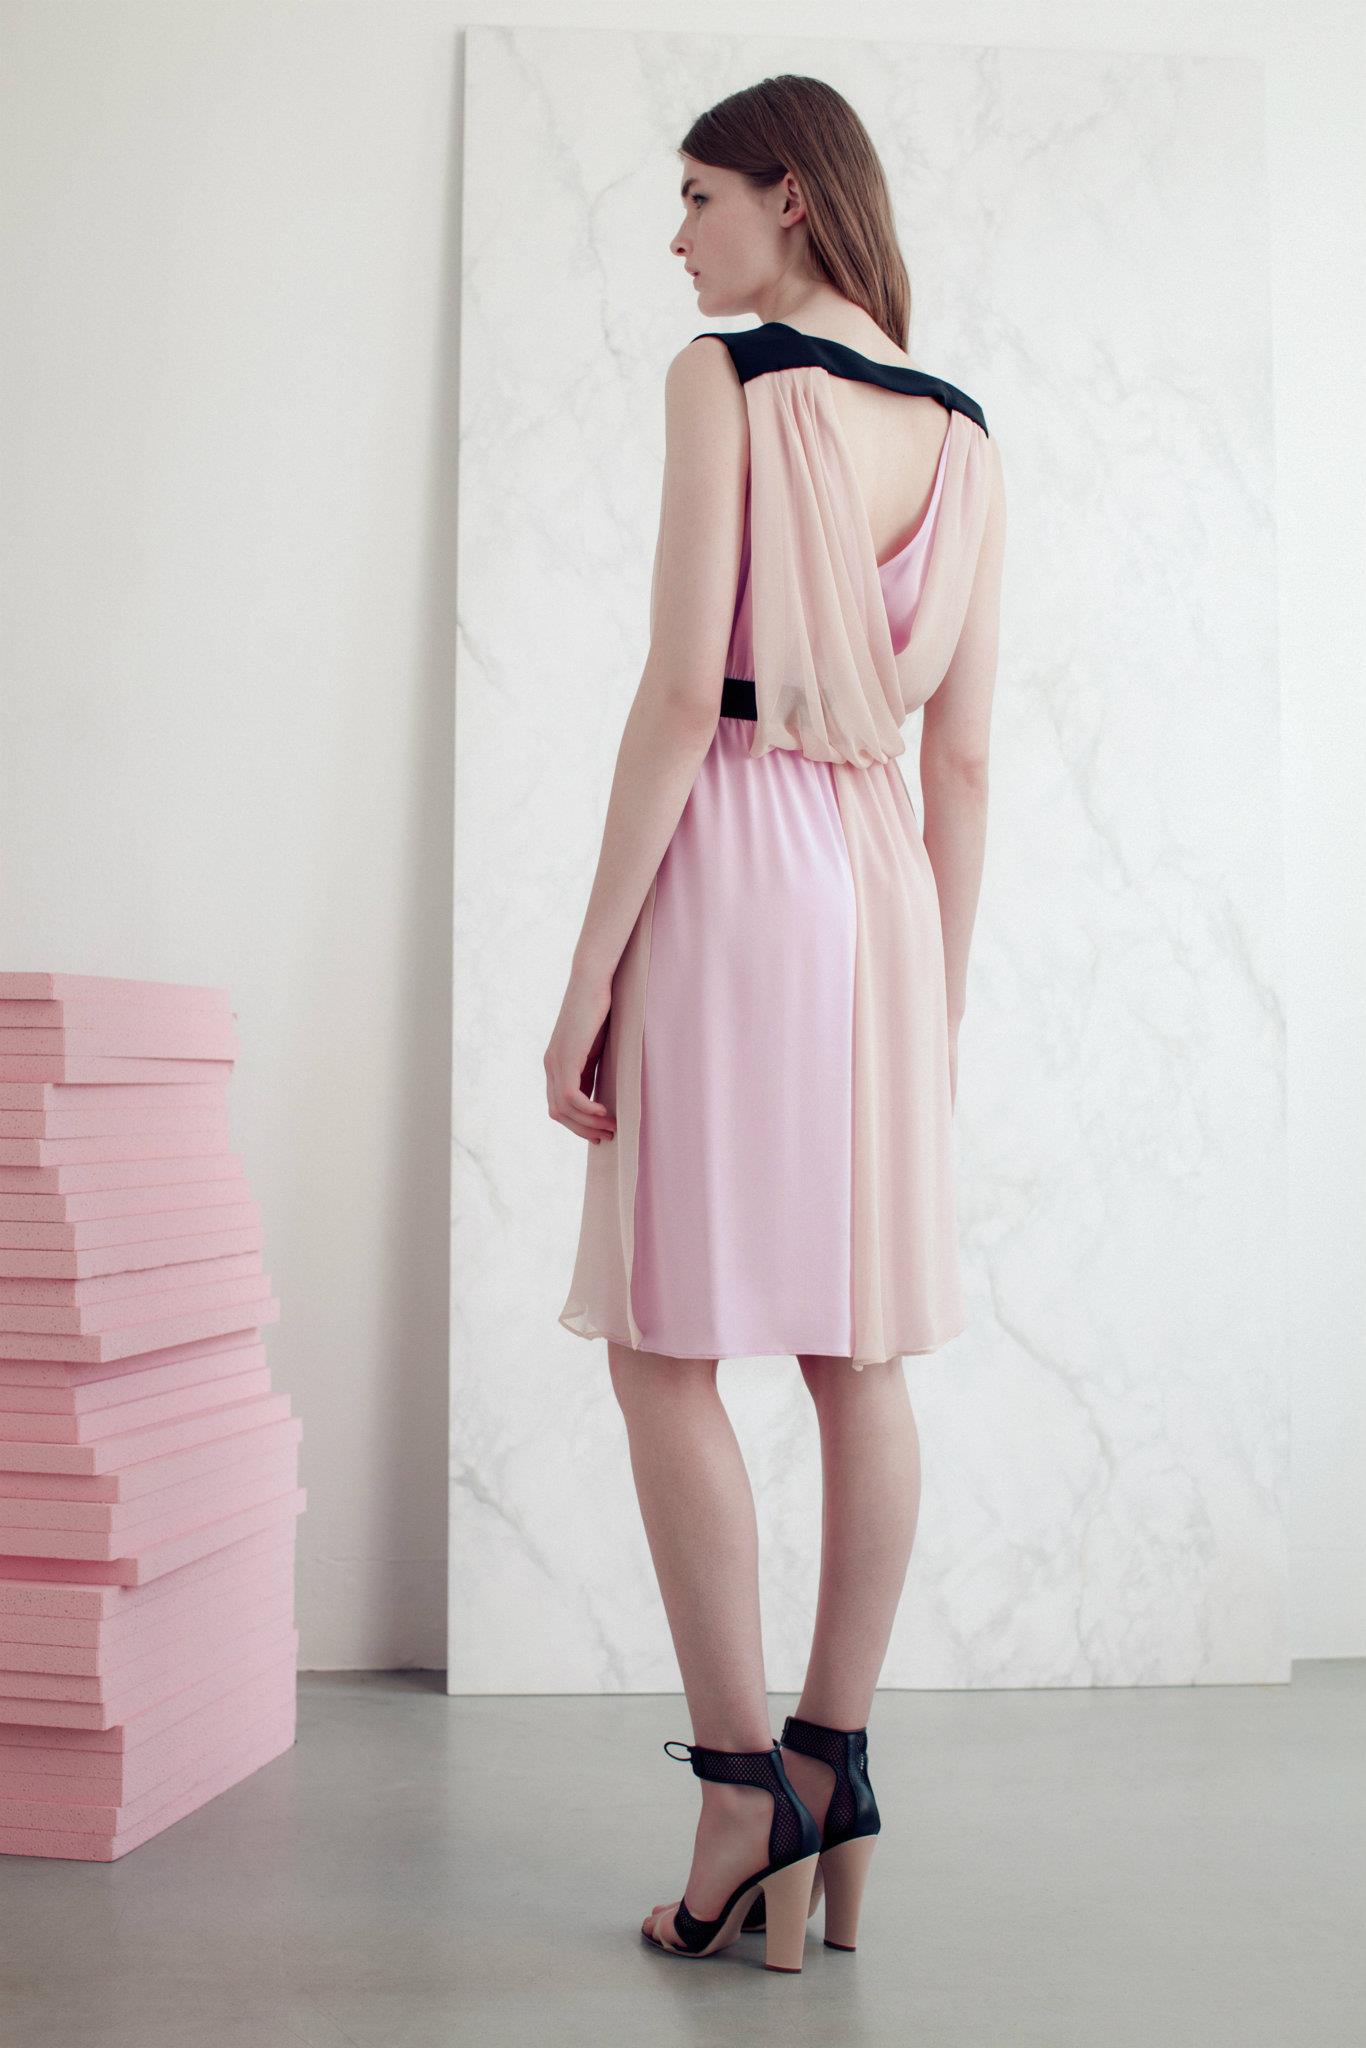 Vionnet Spring 2013 Collection 7